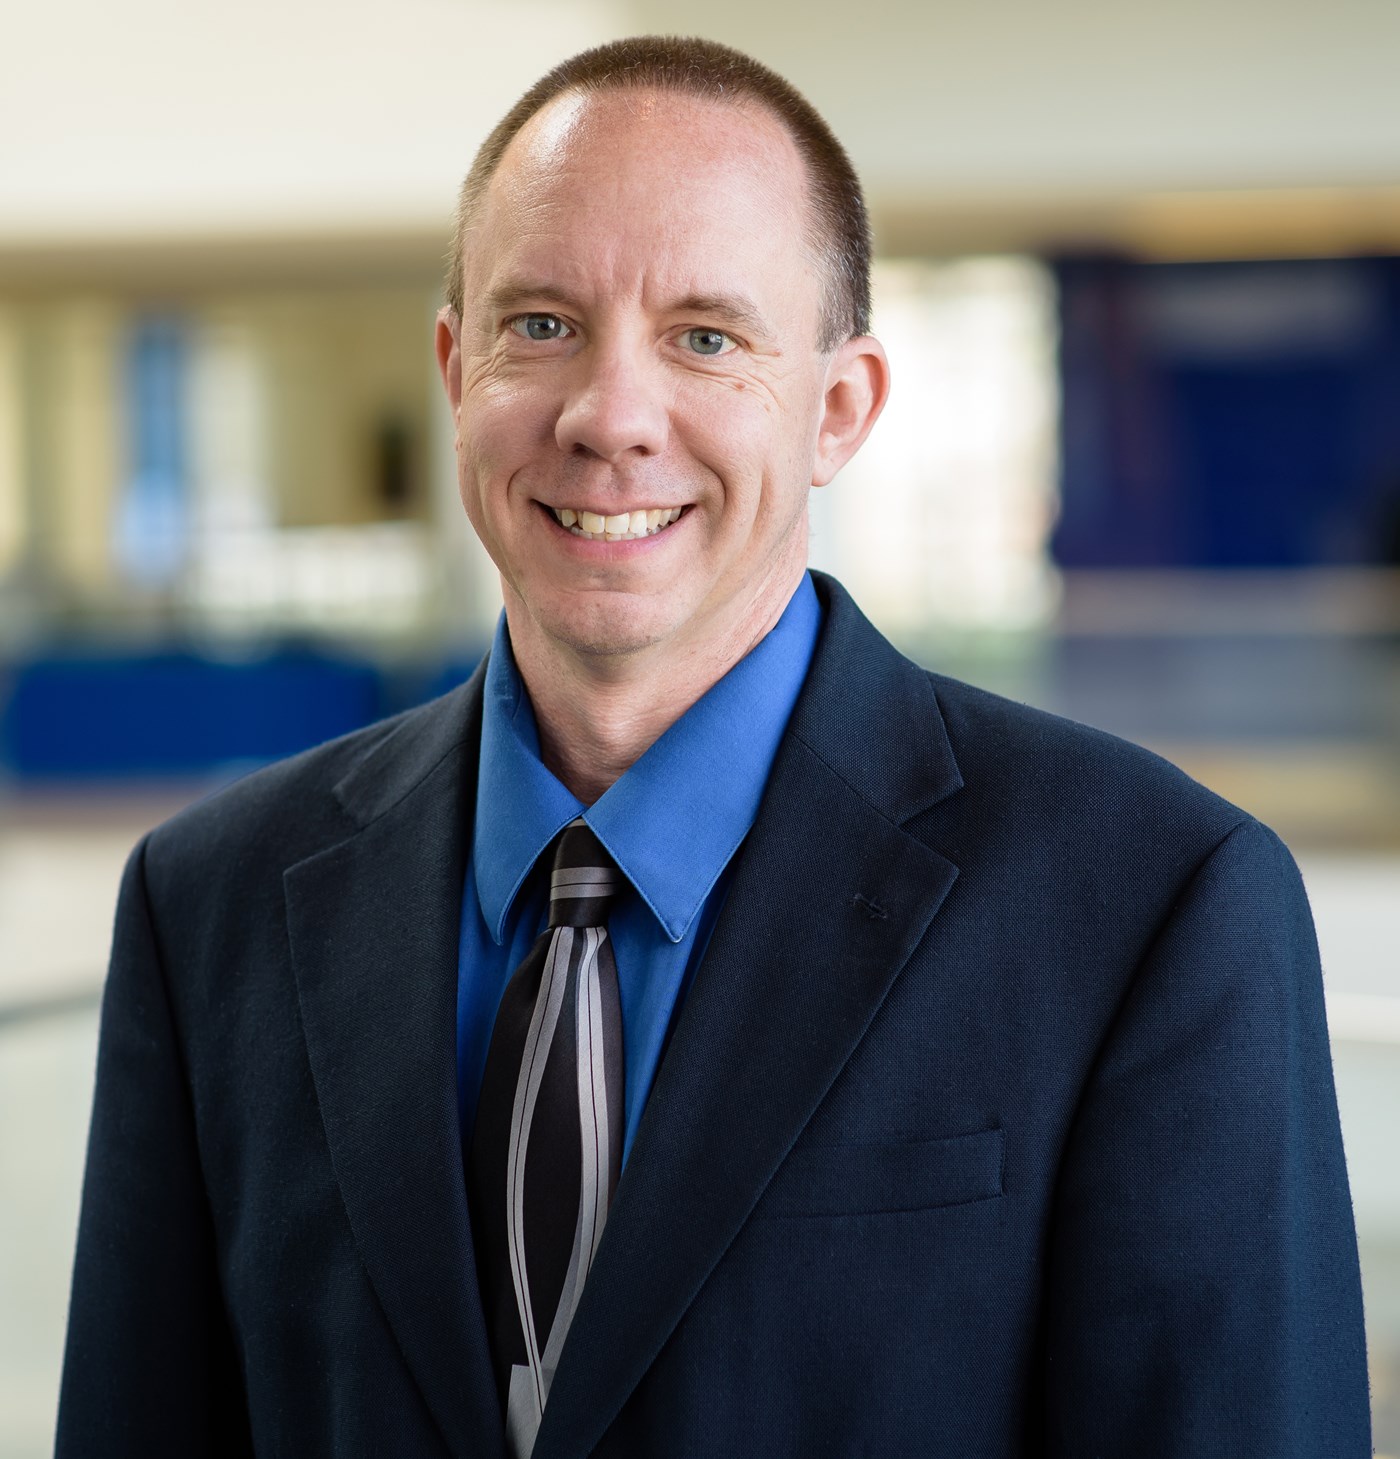 Matthew Gage is Associate Professor, in the Chemistry Department Principal Investigator, Graduate Coordinator, and UMOVE Center Director all at UMass Lowell.